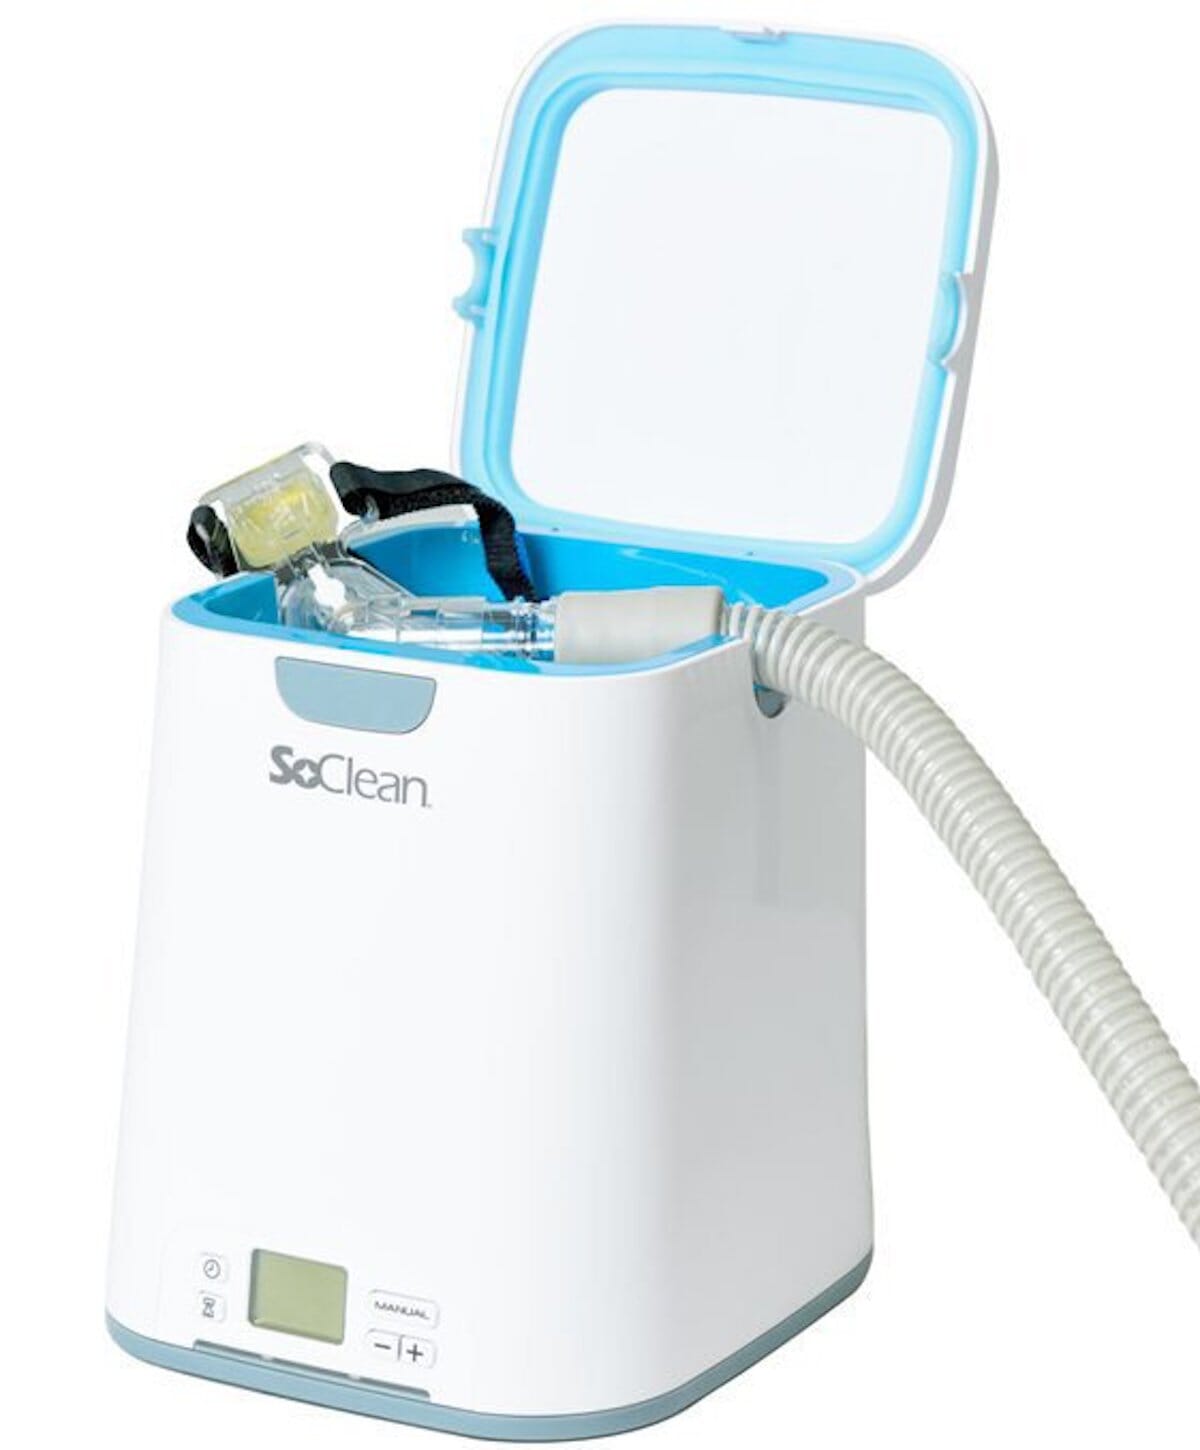 soclean-2-cpap-cleaner-and-sanitizing-machine-review